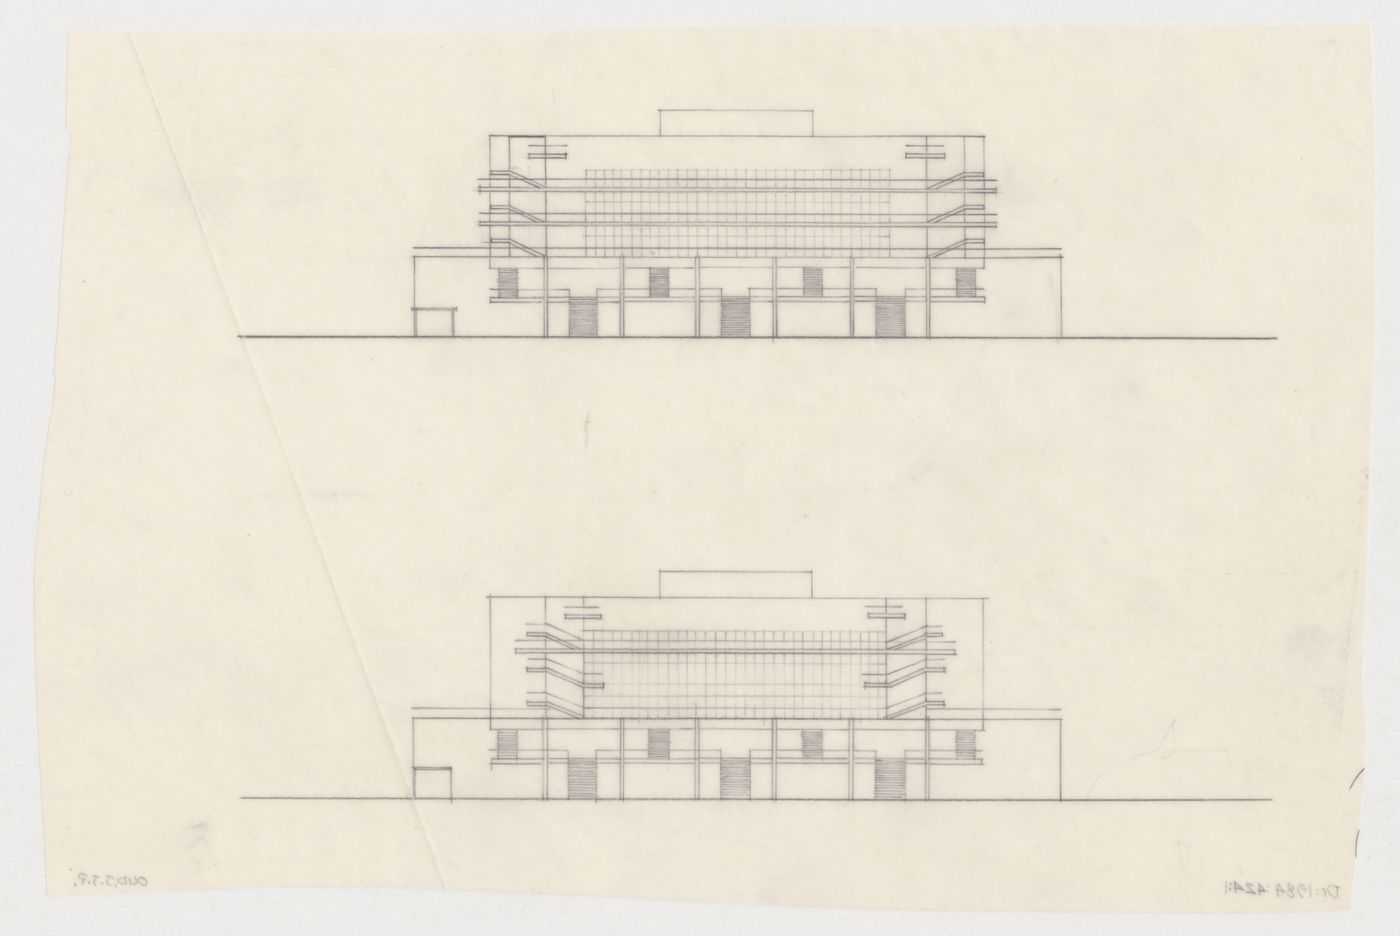 Sections for the Congress Hall Complex, The Hague, Netherlands